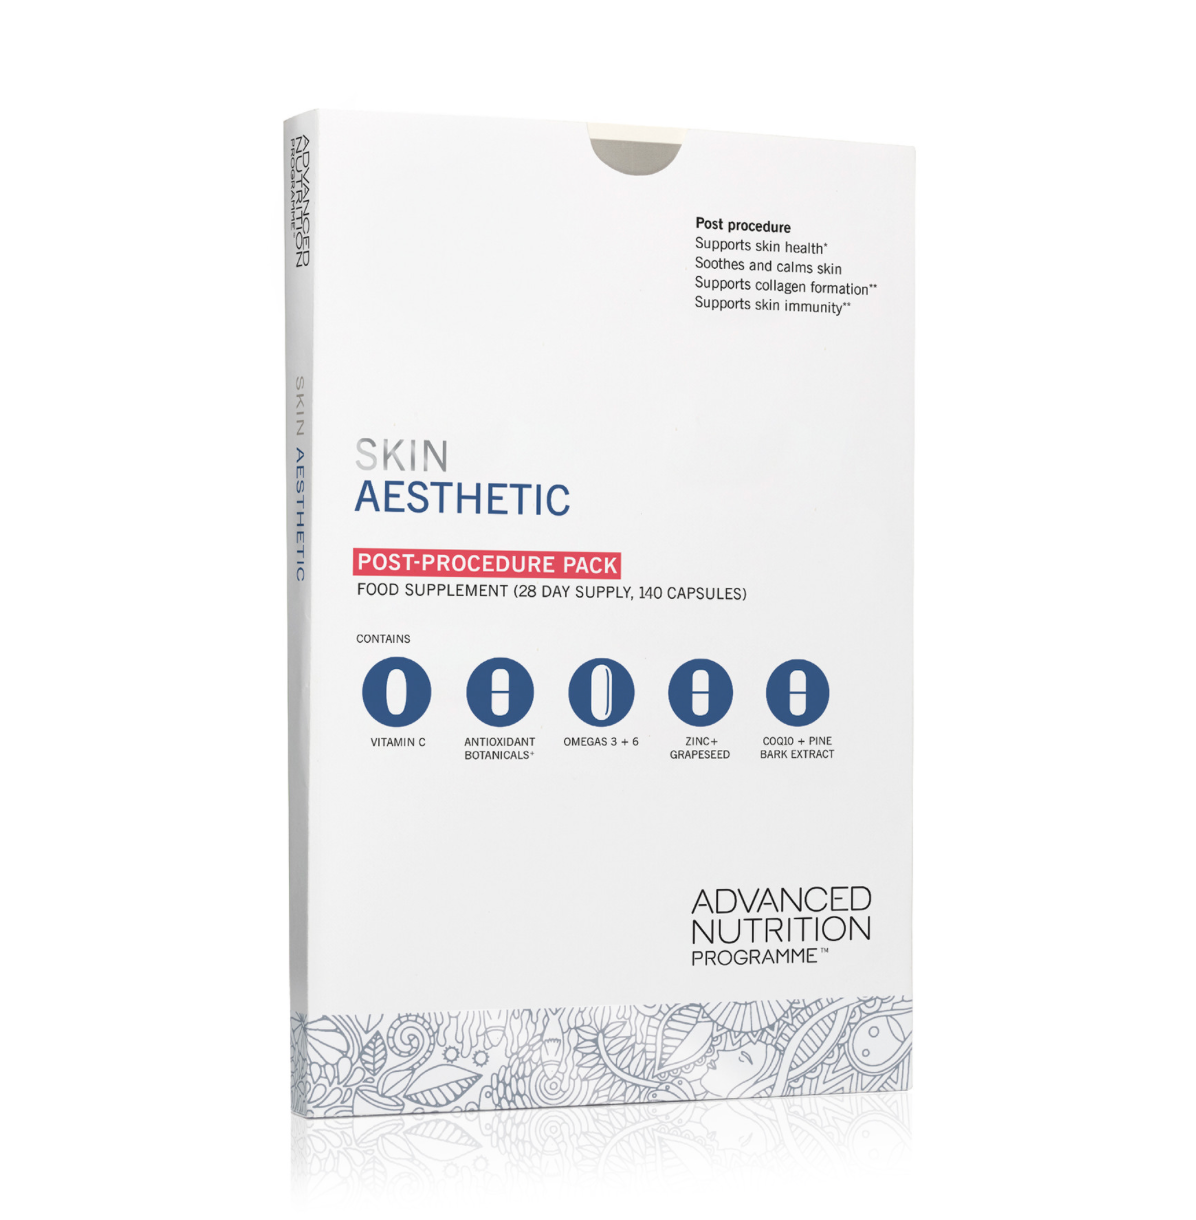 Advanced Nutrition Programme Skin Aesthetic 28 Day Supply